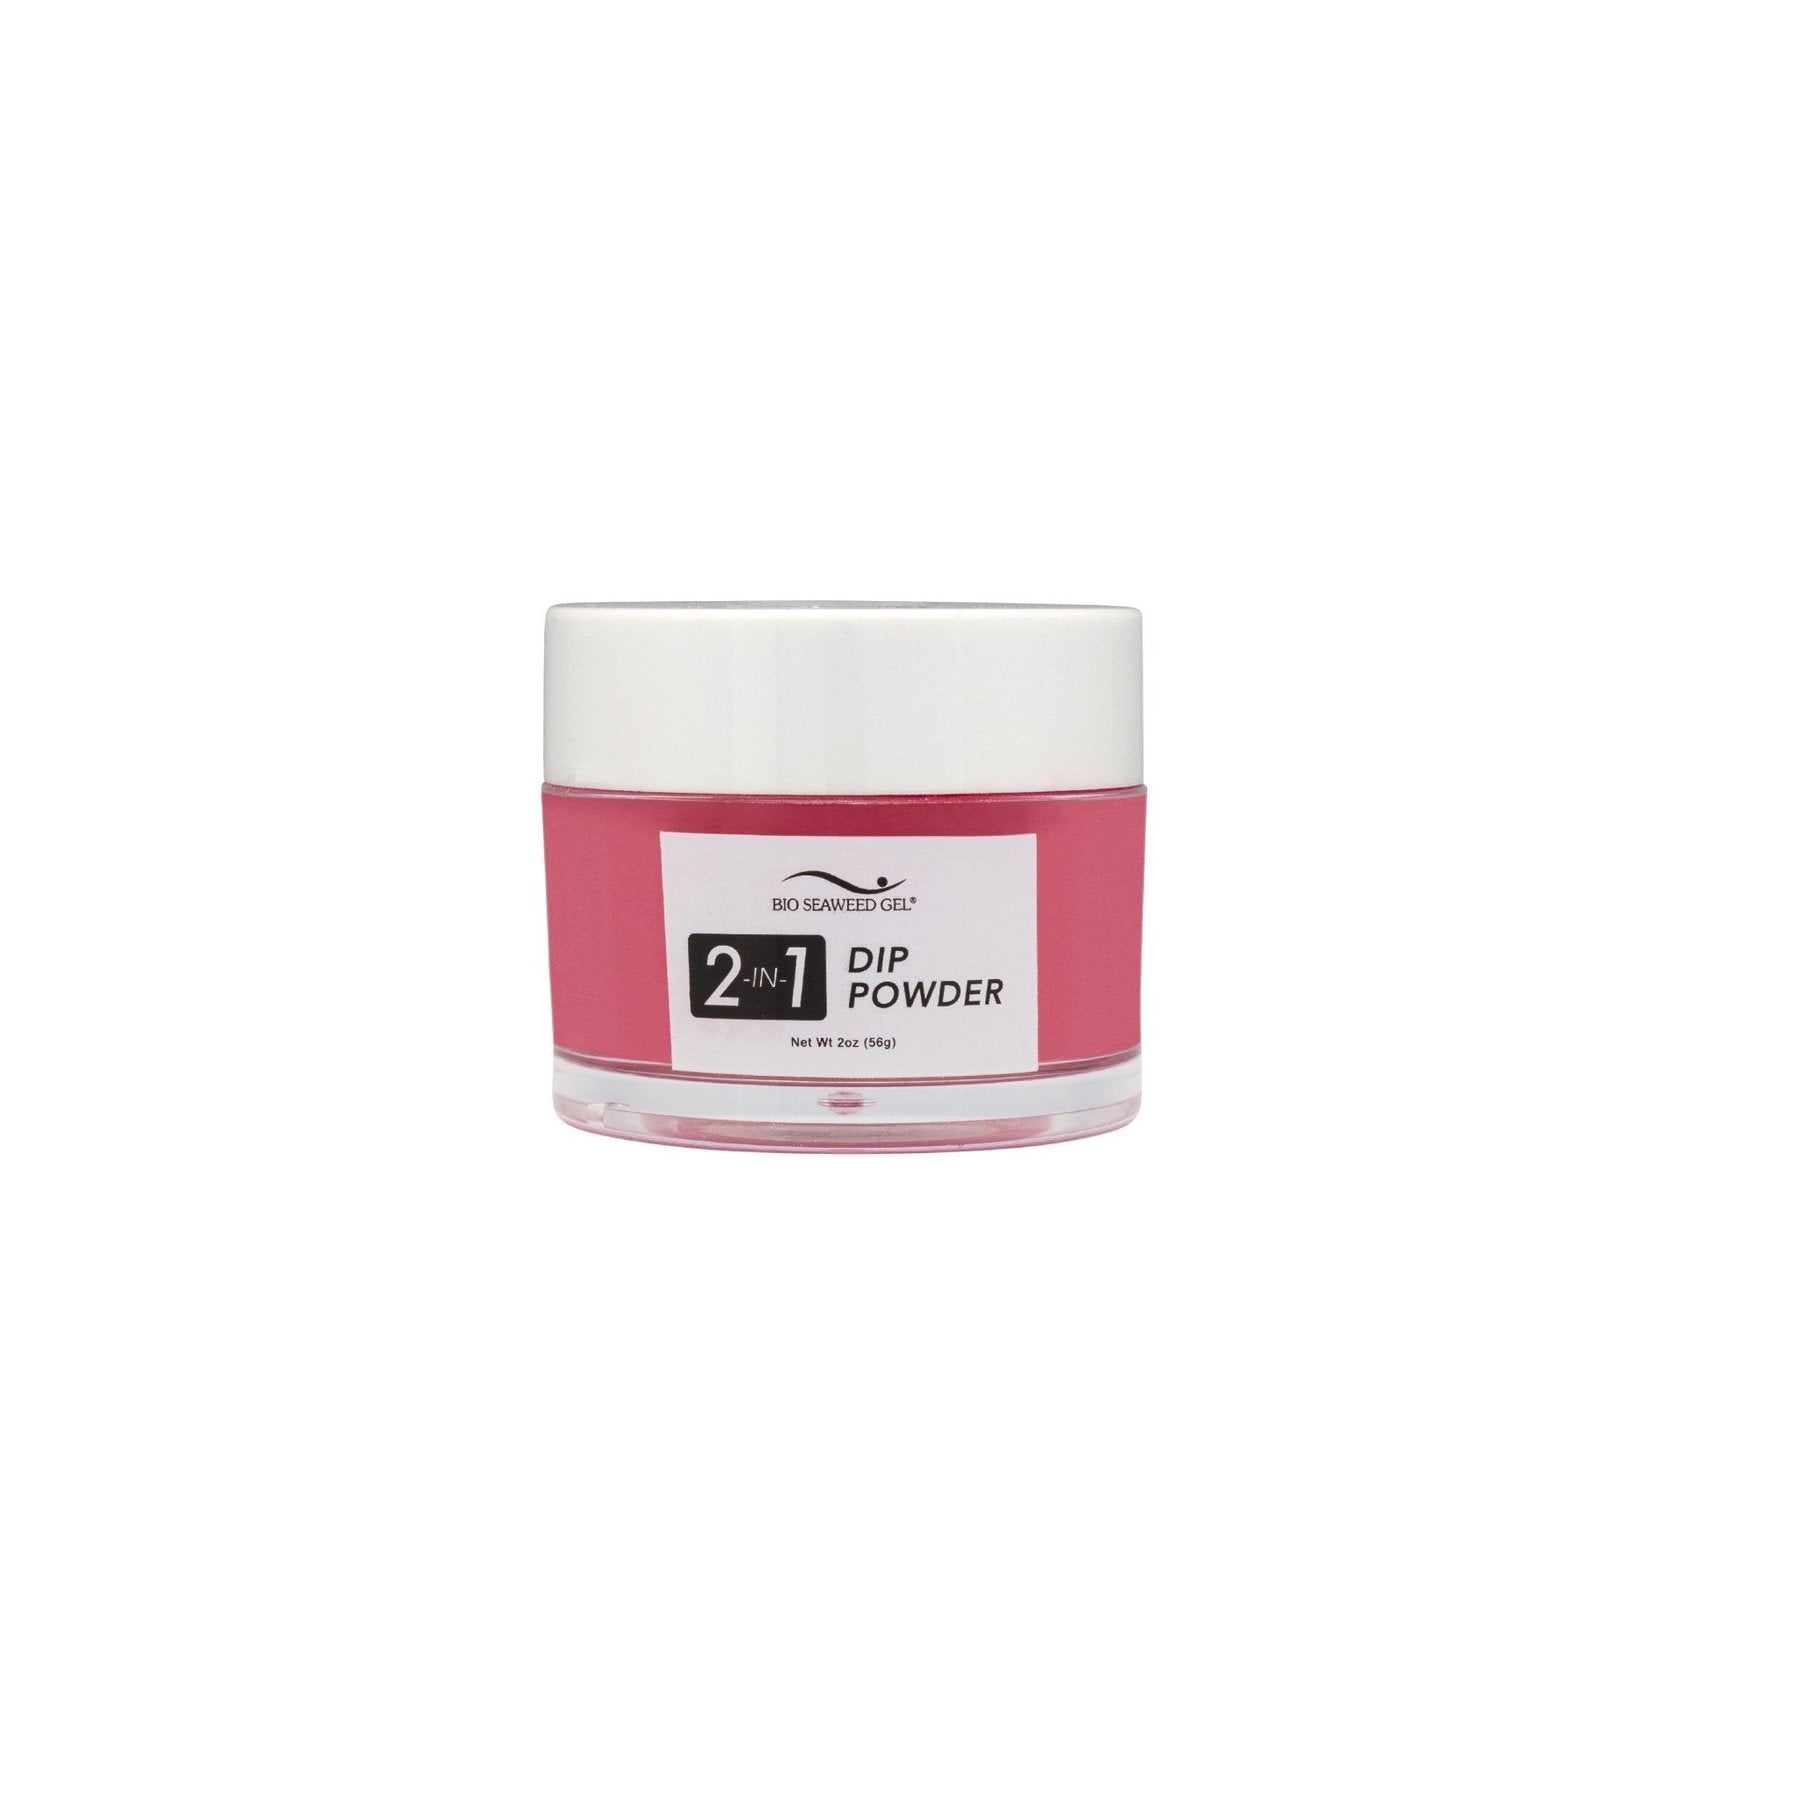 70 RED DELICIOUS | Bio Seaweed Gel® Dip Powder System - CM Nails & Beauty Supply